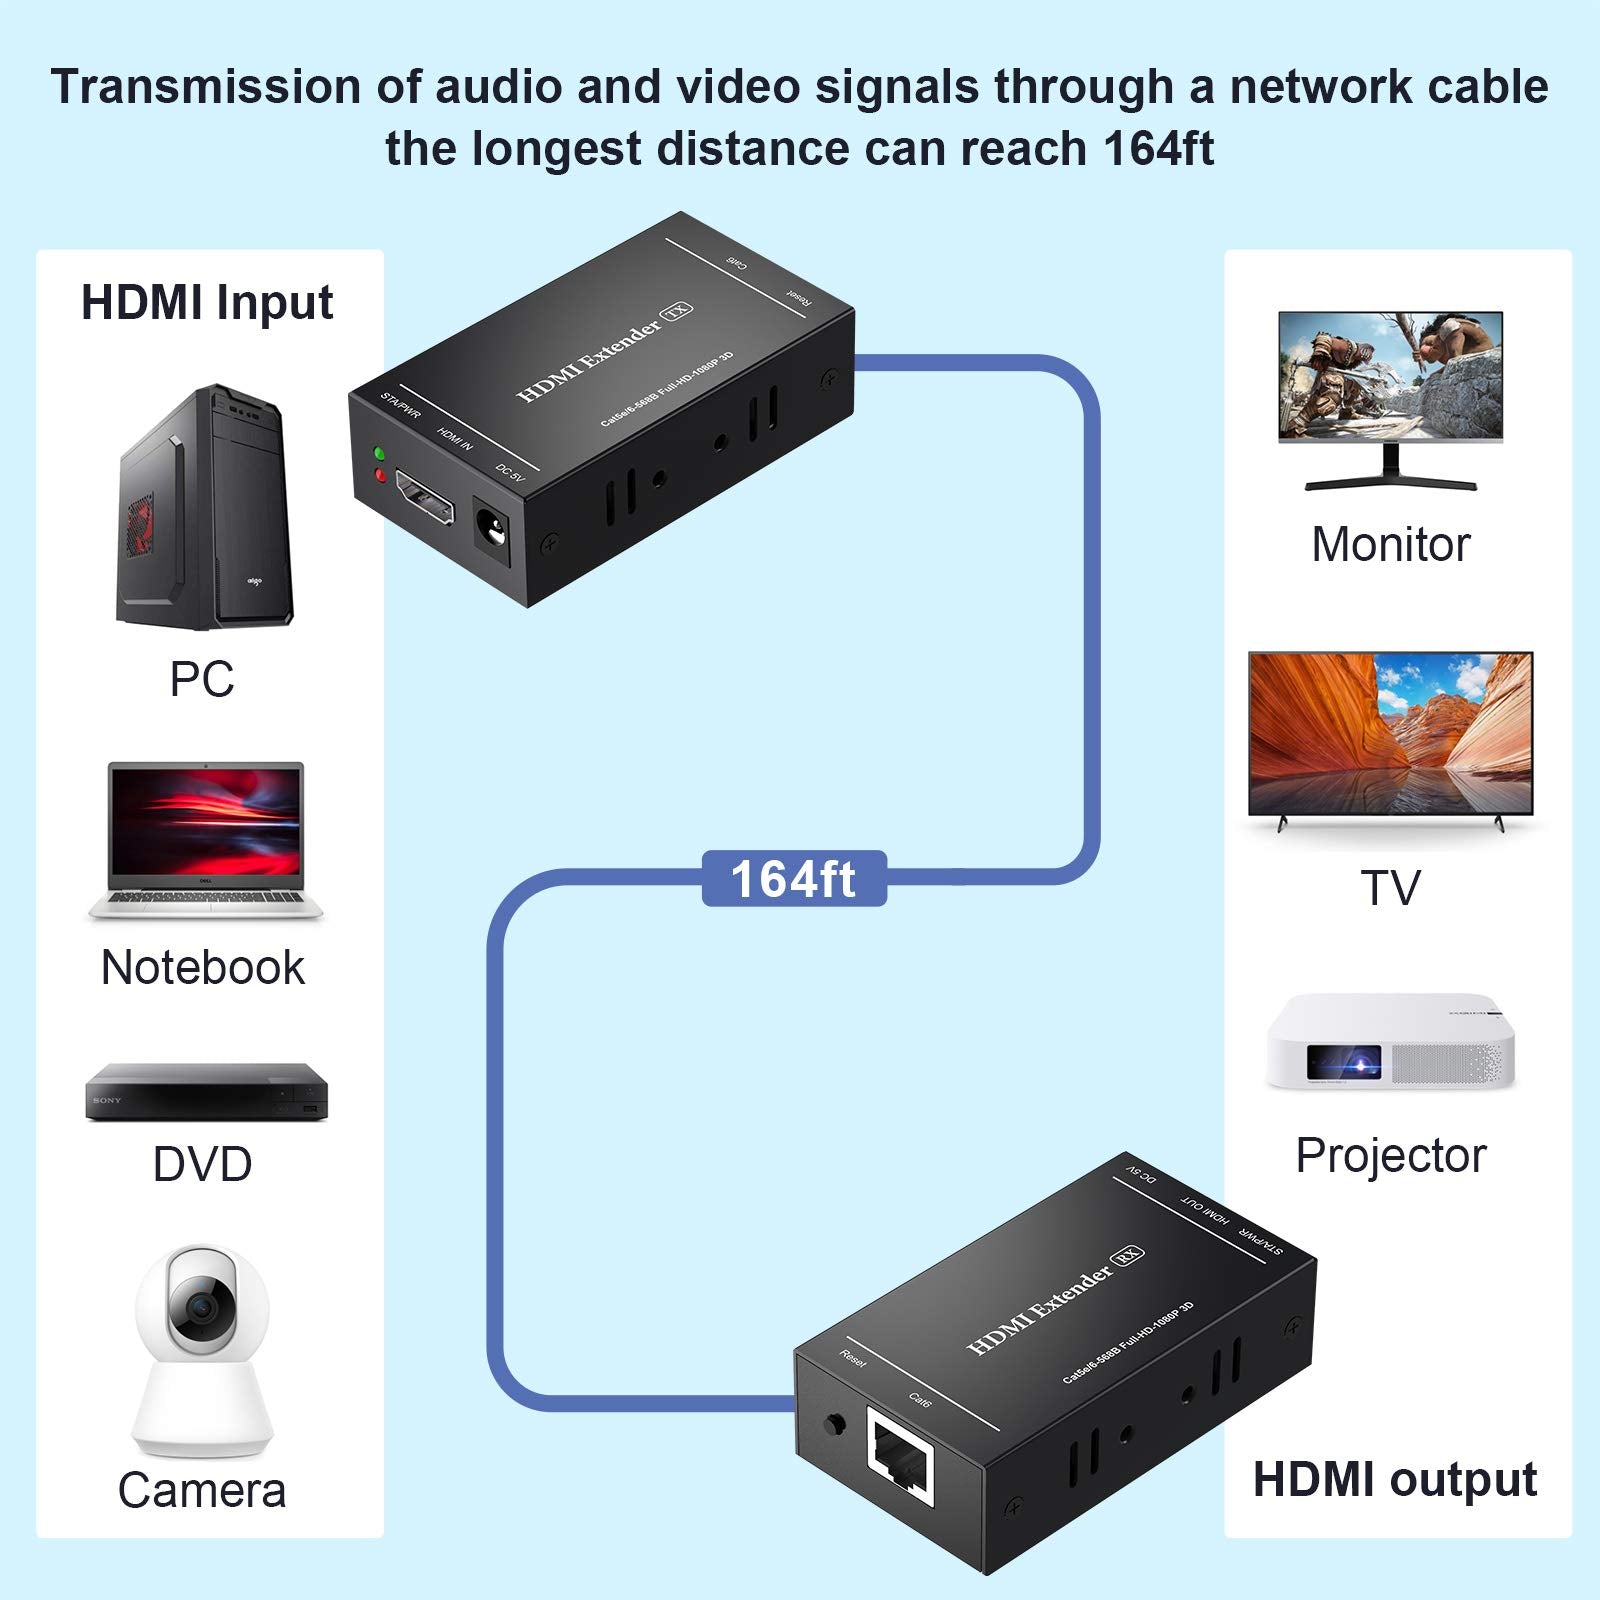 Rybozen Digital HDMI Extender, by Single CAT6/CAT7 Cable Full HD Uncompressed Transmit Up to 196 Ft(60m), Support 1080p@60Hz, 3D Signal, EDID Copy, Deep Color（Transmitter and Receiver）